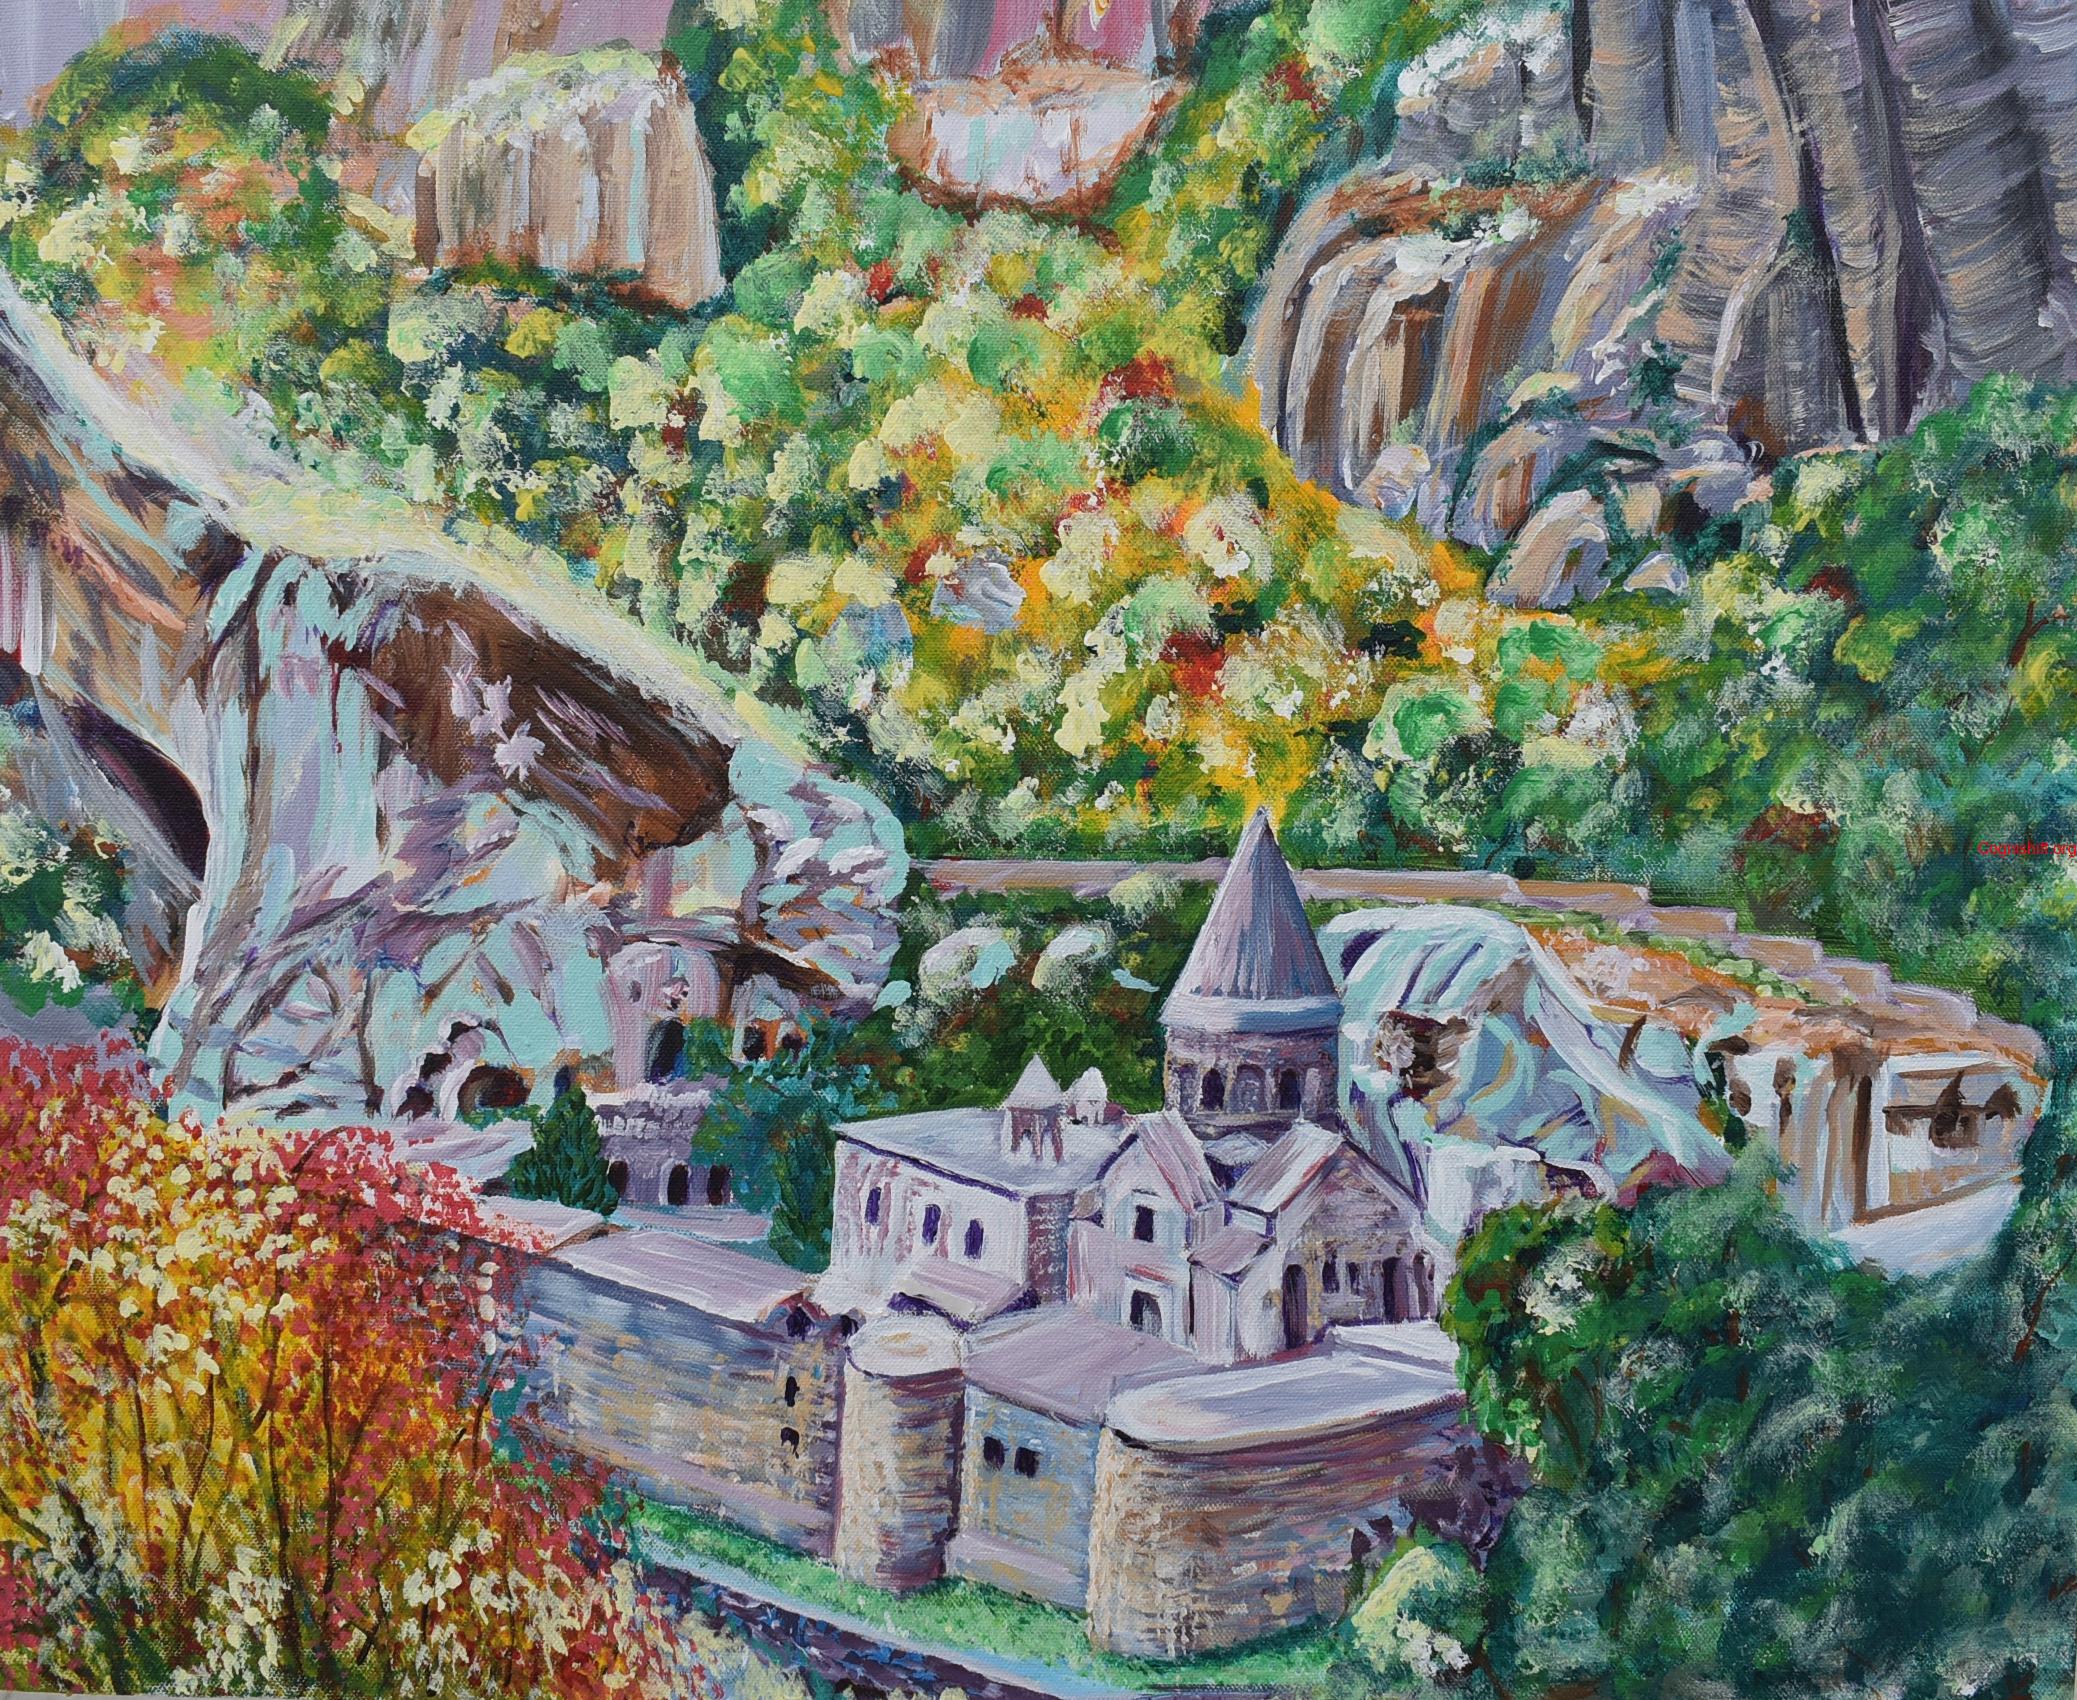 Geghard monastery Acrylic on Canvas painting 50×60cm Original art Mari Poghosyan Geghard (Armenian: Գեղարդ, meaning "spear") is a medieval monastery in the Kotayk province of Armenia, being partially carved out of the adjacent mountain, surrounded by cliffs. It is listed as a UNESCO World Heritage Site with enhanced protection status.